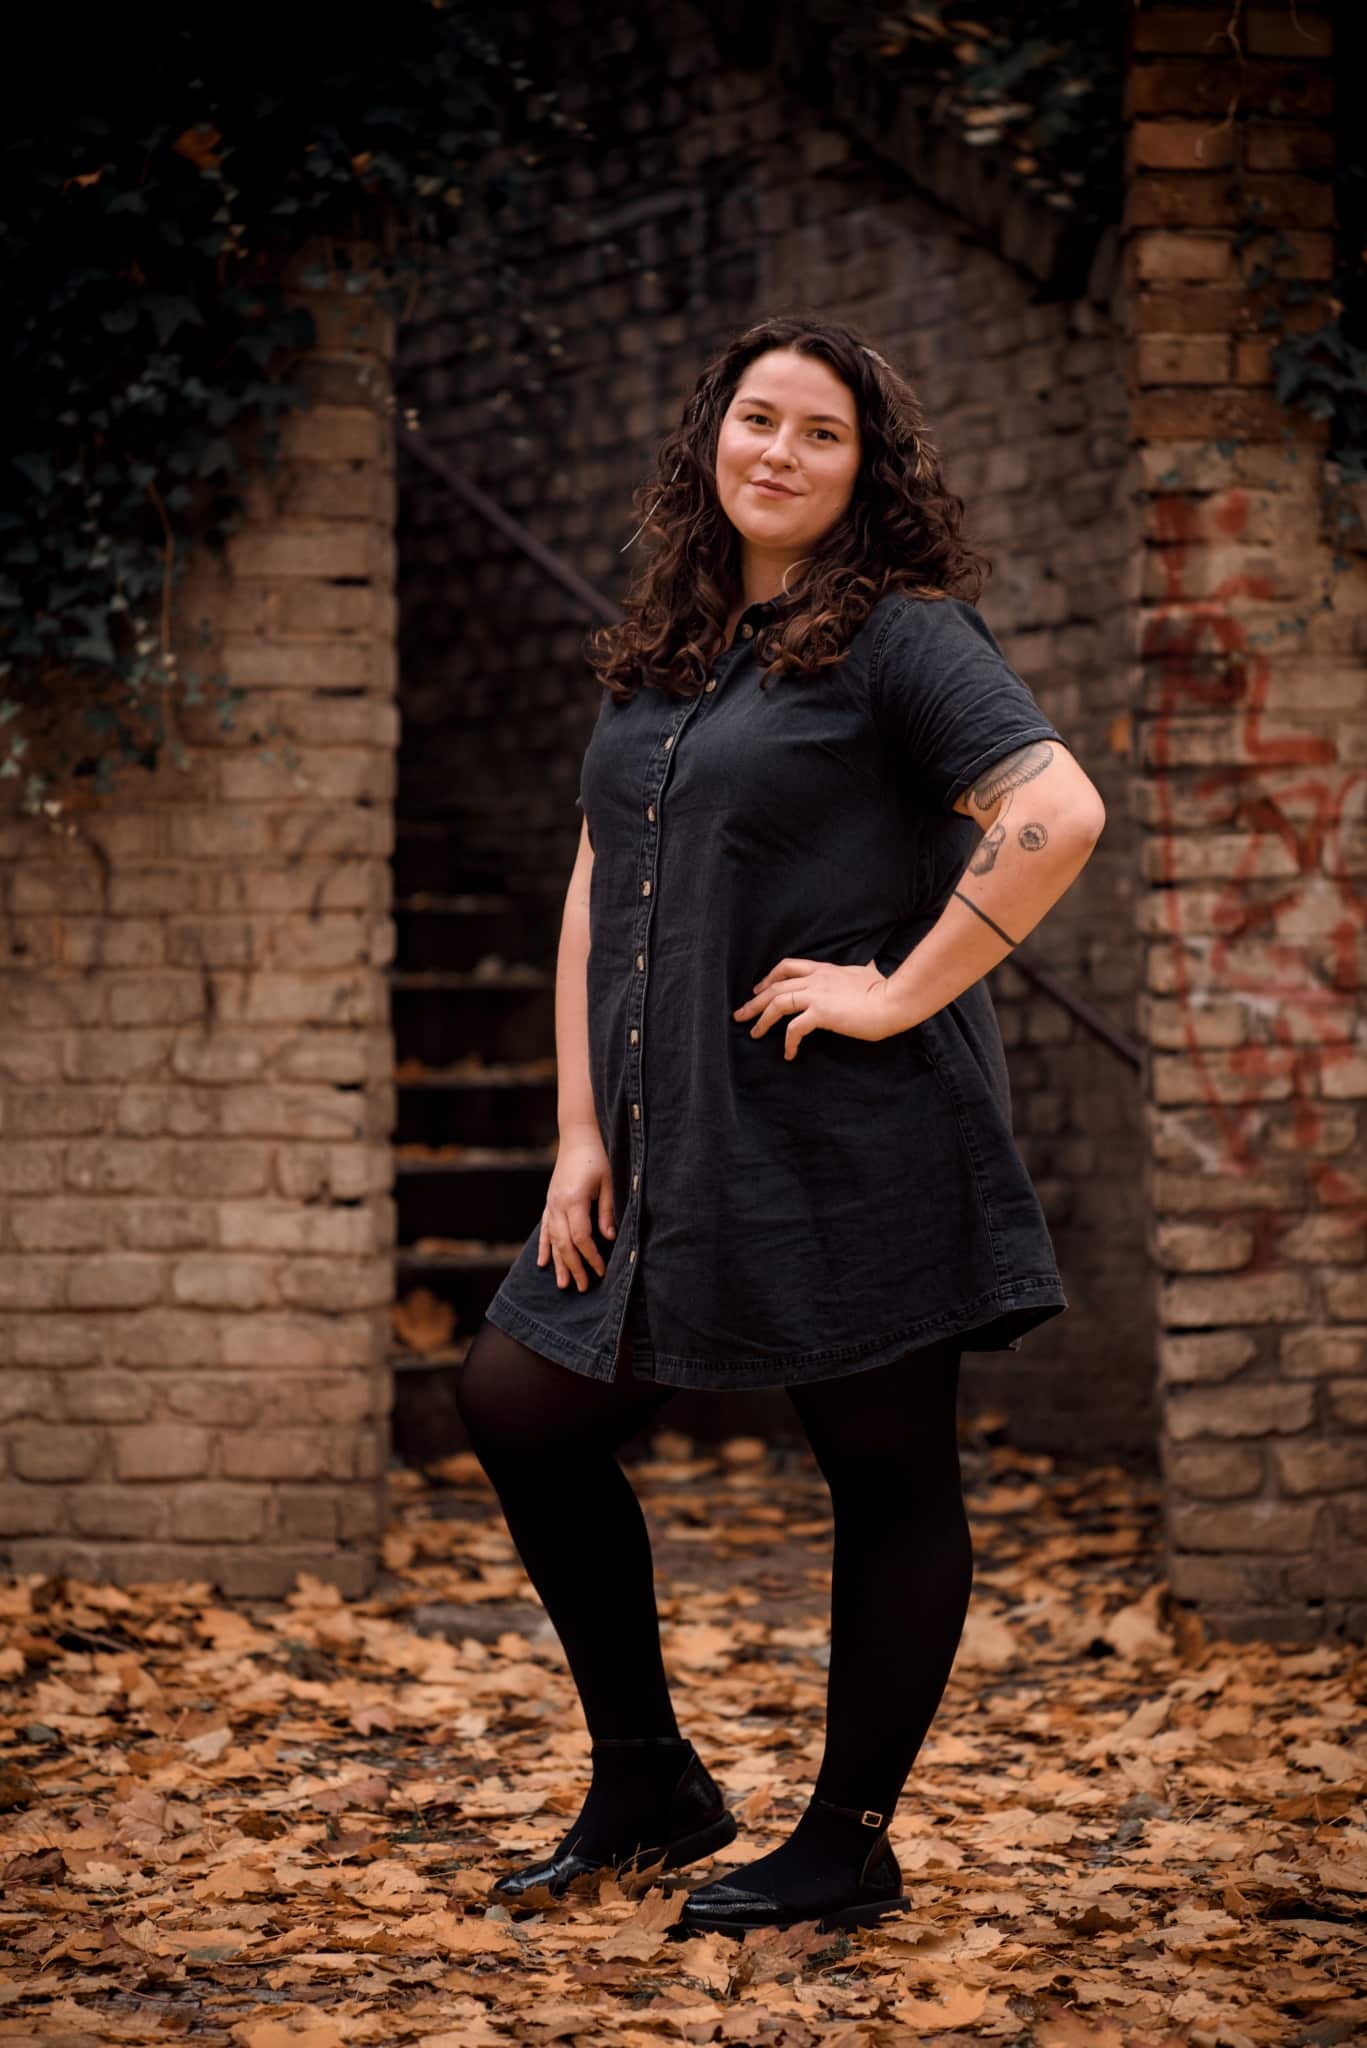 Plus-size portrait photography (and more)